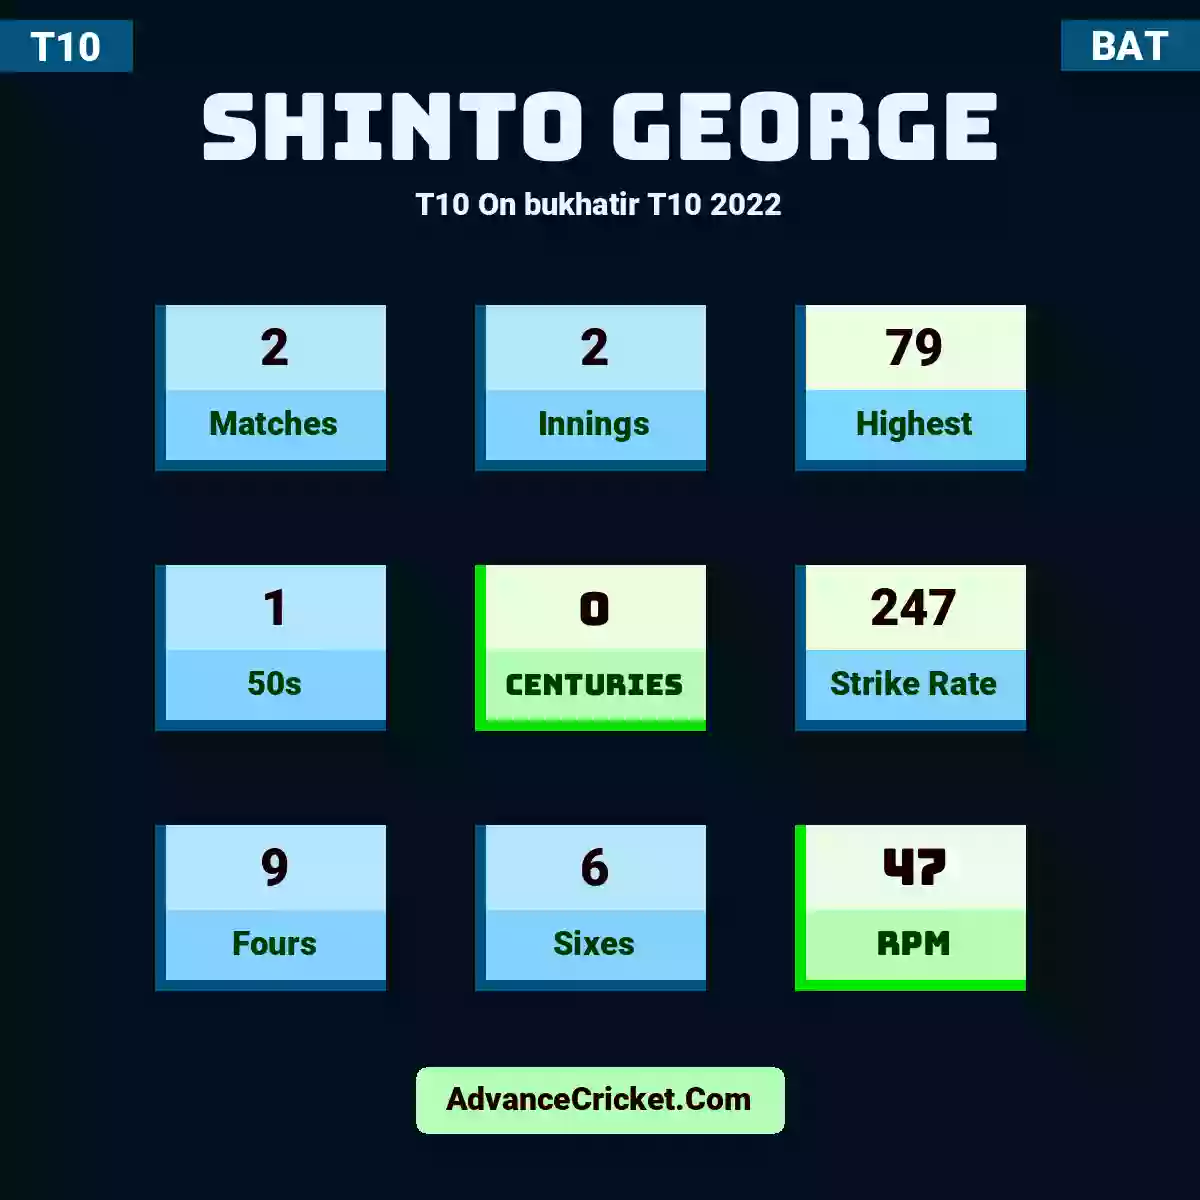 Shinto George T10  On bukhatir T10 2022, Shinto George played 2 matches, scored 79 runs as highest, 1 half-centuries, and 0 centuries, with a strike rate of 247. S.George hit 9 fours and 6 sixes, with an RPM of 47.